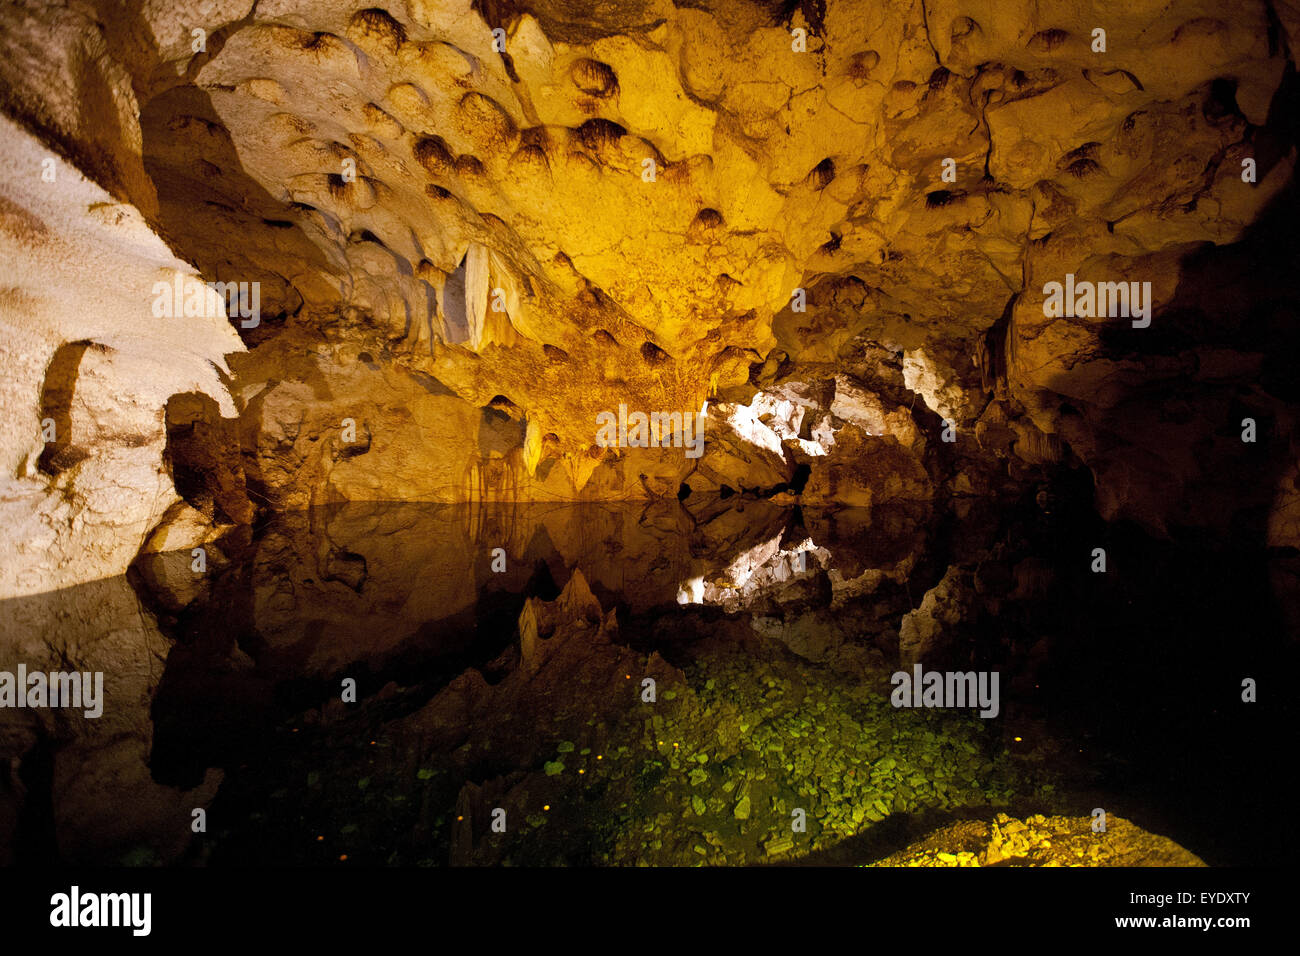 Underground lake in the Belly of the cave, Green Grotto Caves, Discovery Bay, St. Ann, Jamaica Stock Photo